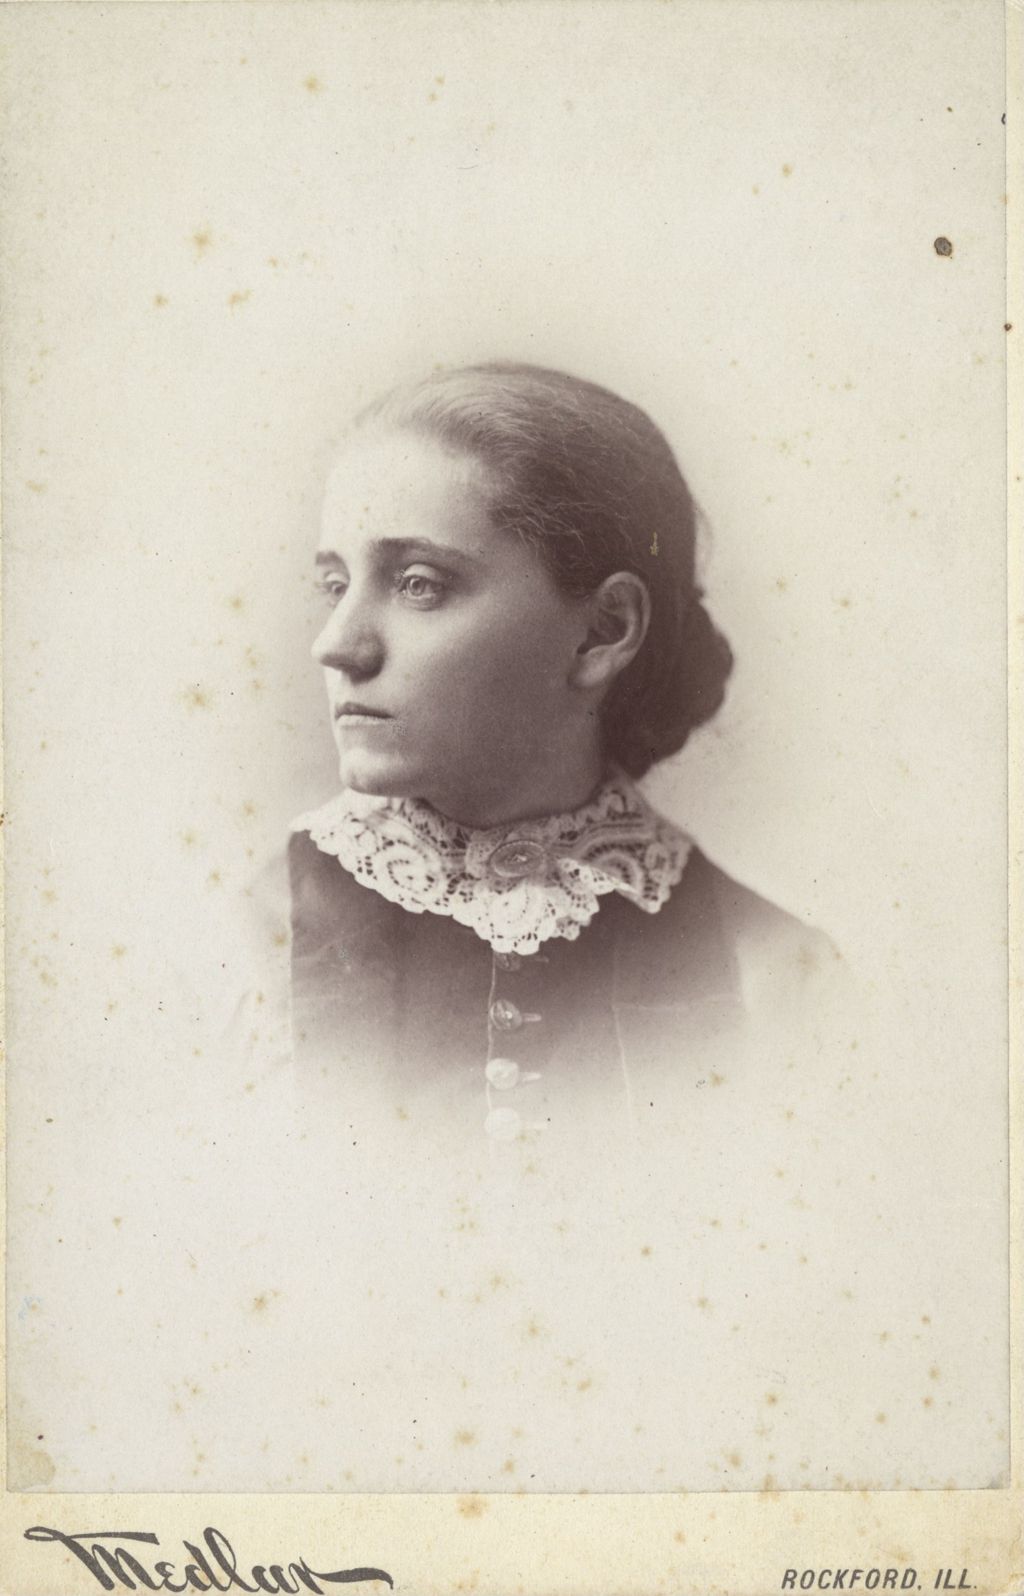 Miniature of Portrait of Jane Addams, at age 18, while an undergraduate at Rockford Female Seminary